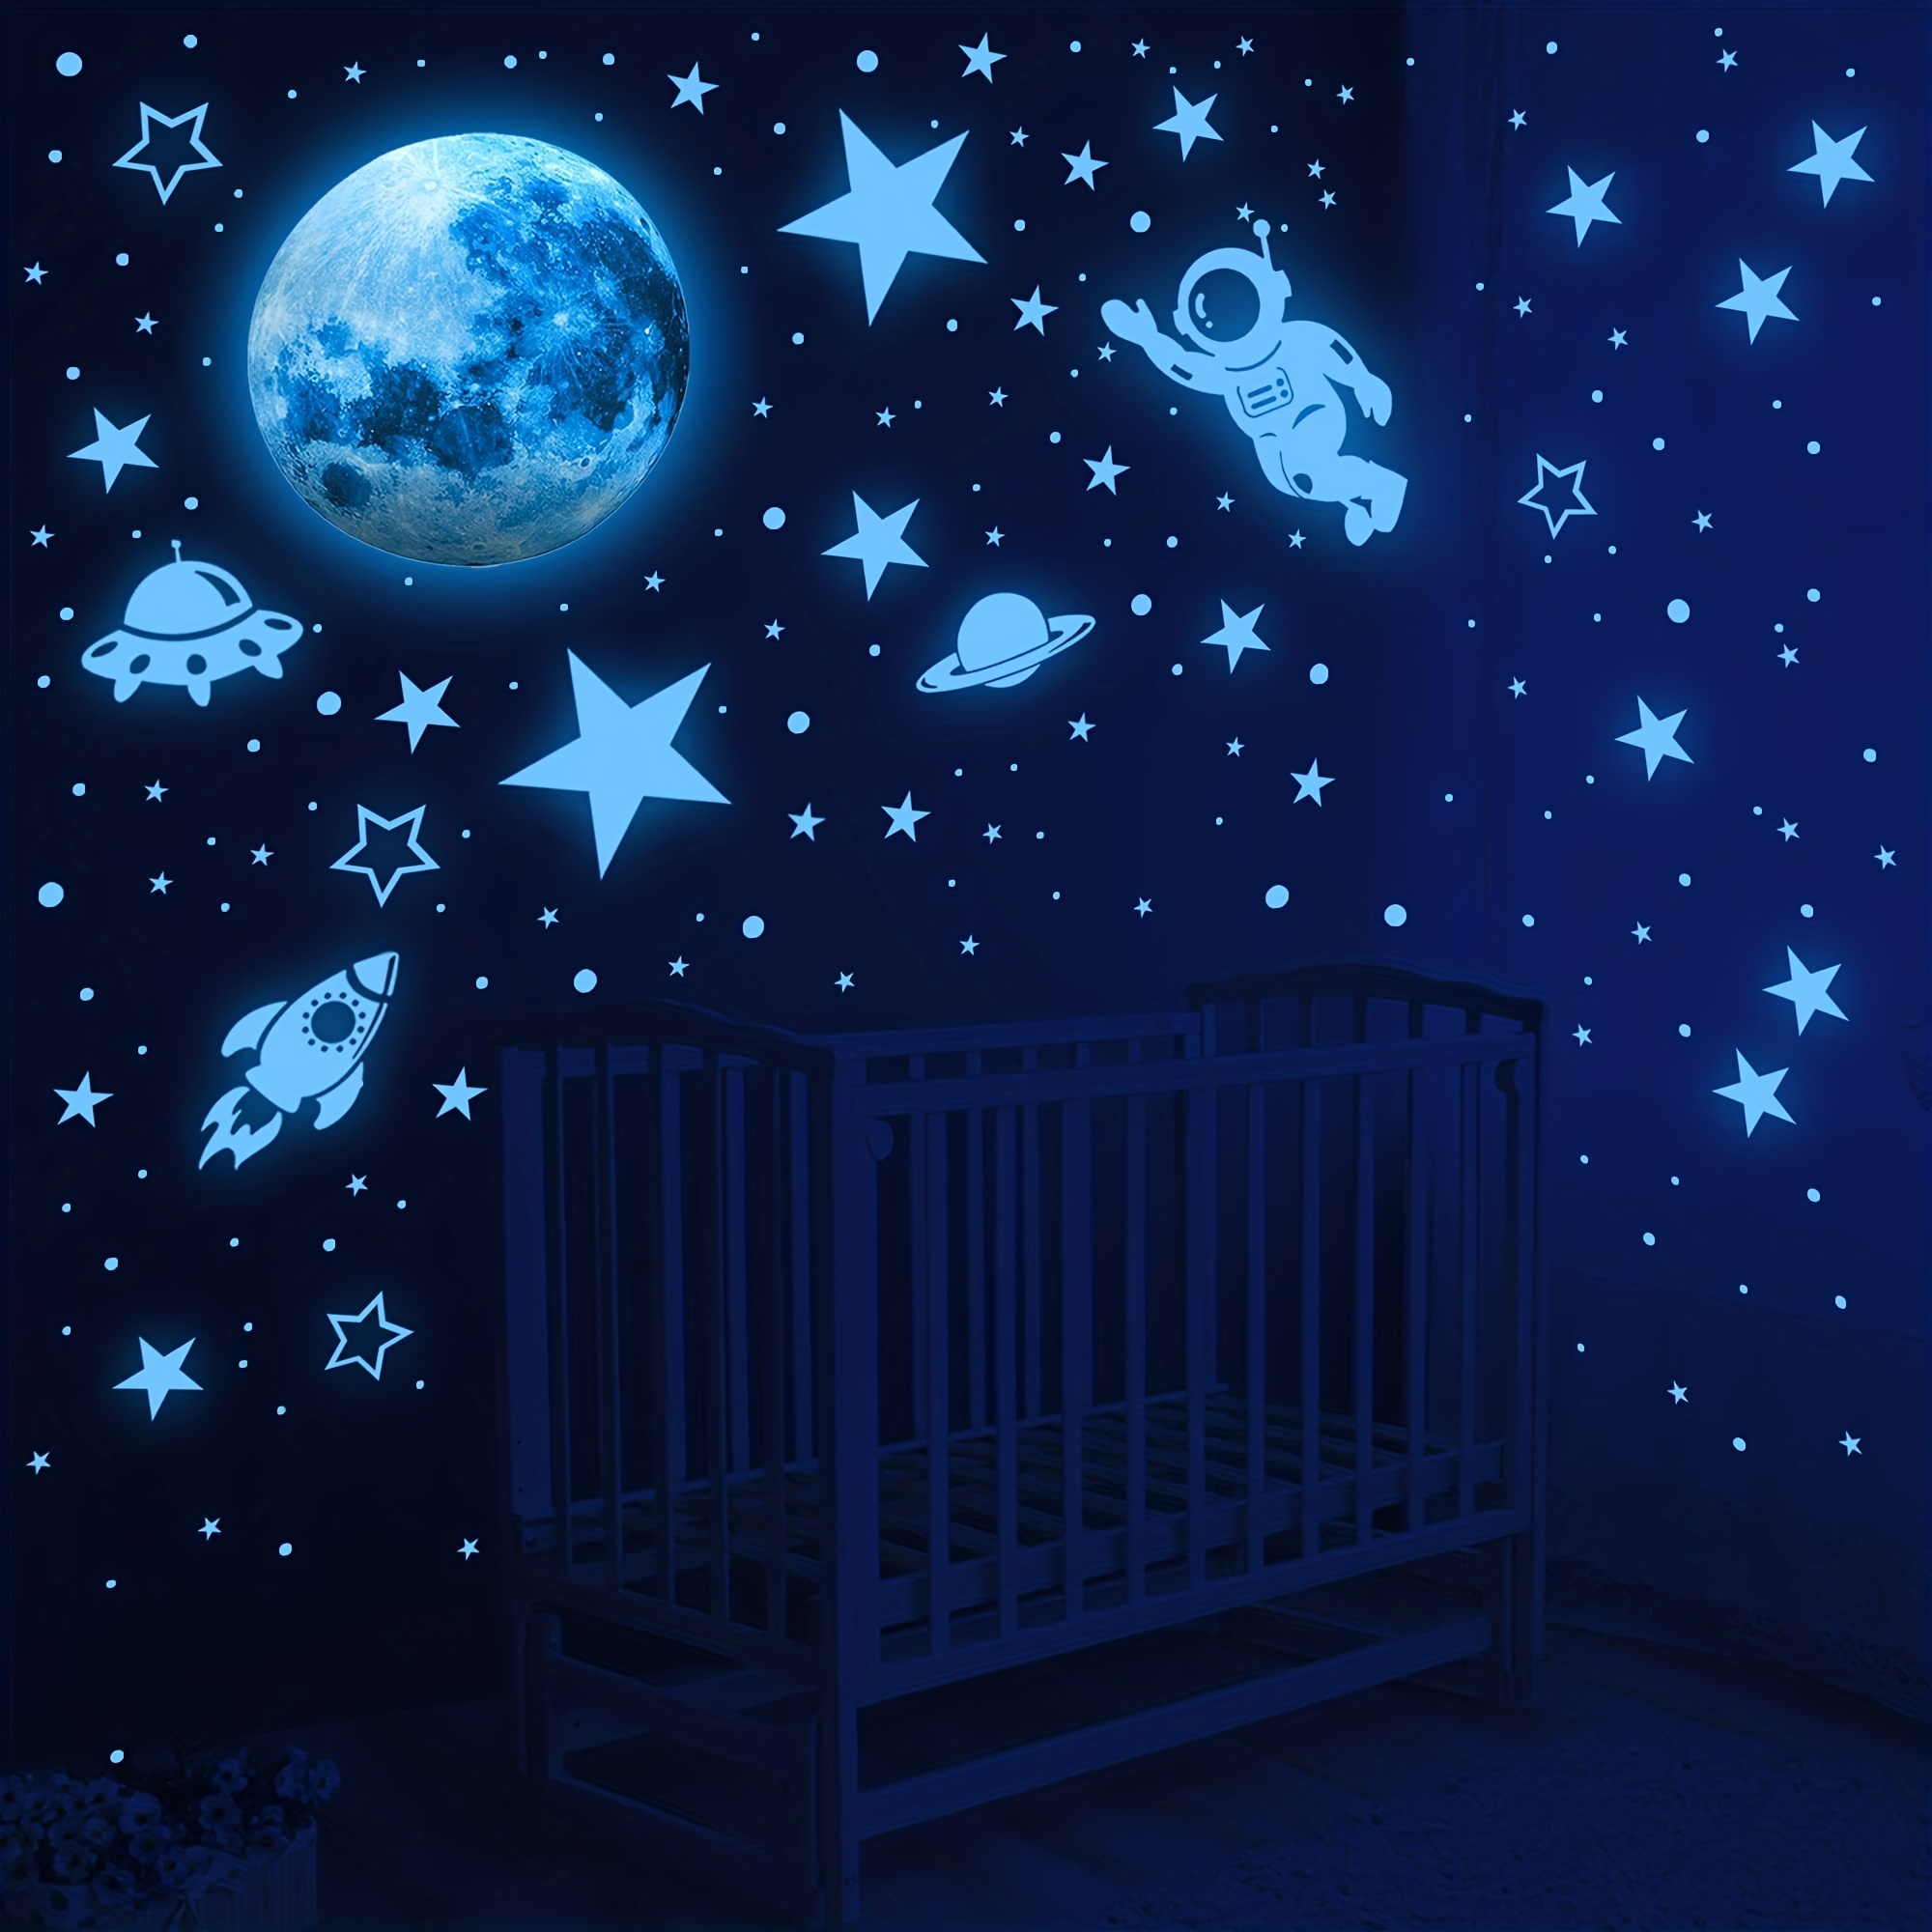 531pcs Glow In The Dark Stars And Planets Wall Stickers, Galaxy Astronaut  Rocket Spaceship Alien Decoration, Planet Wall Decals, Bright Solar System W